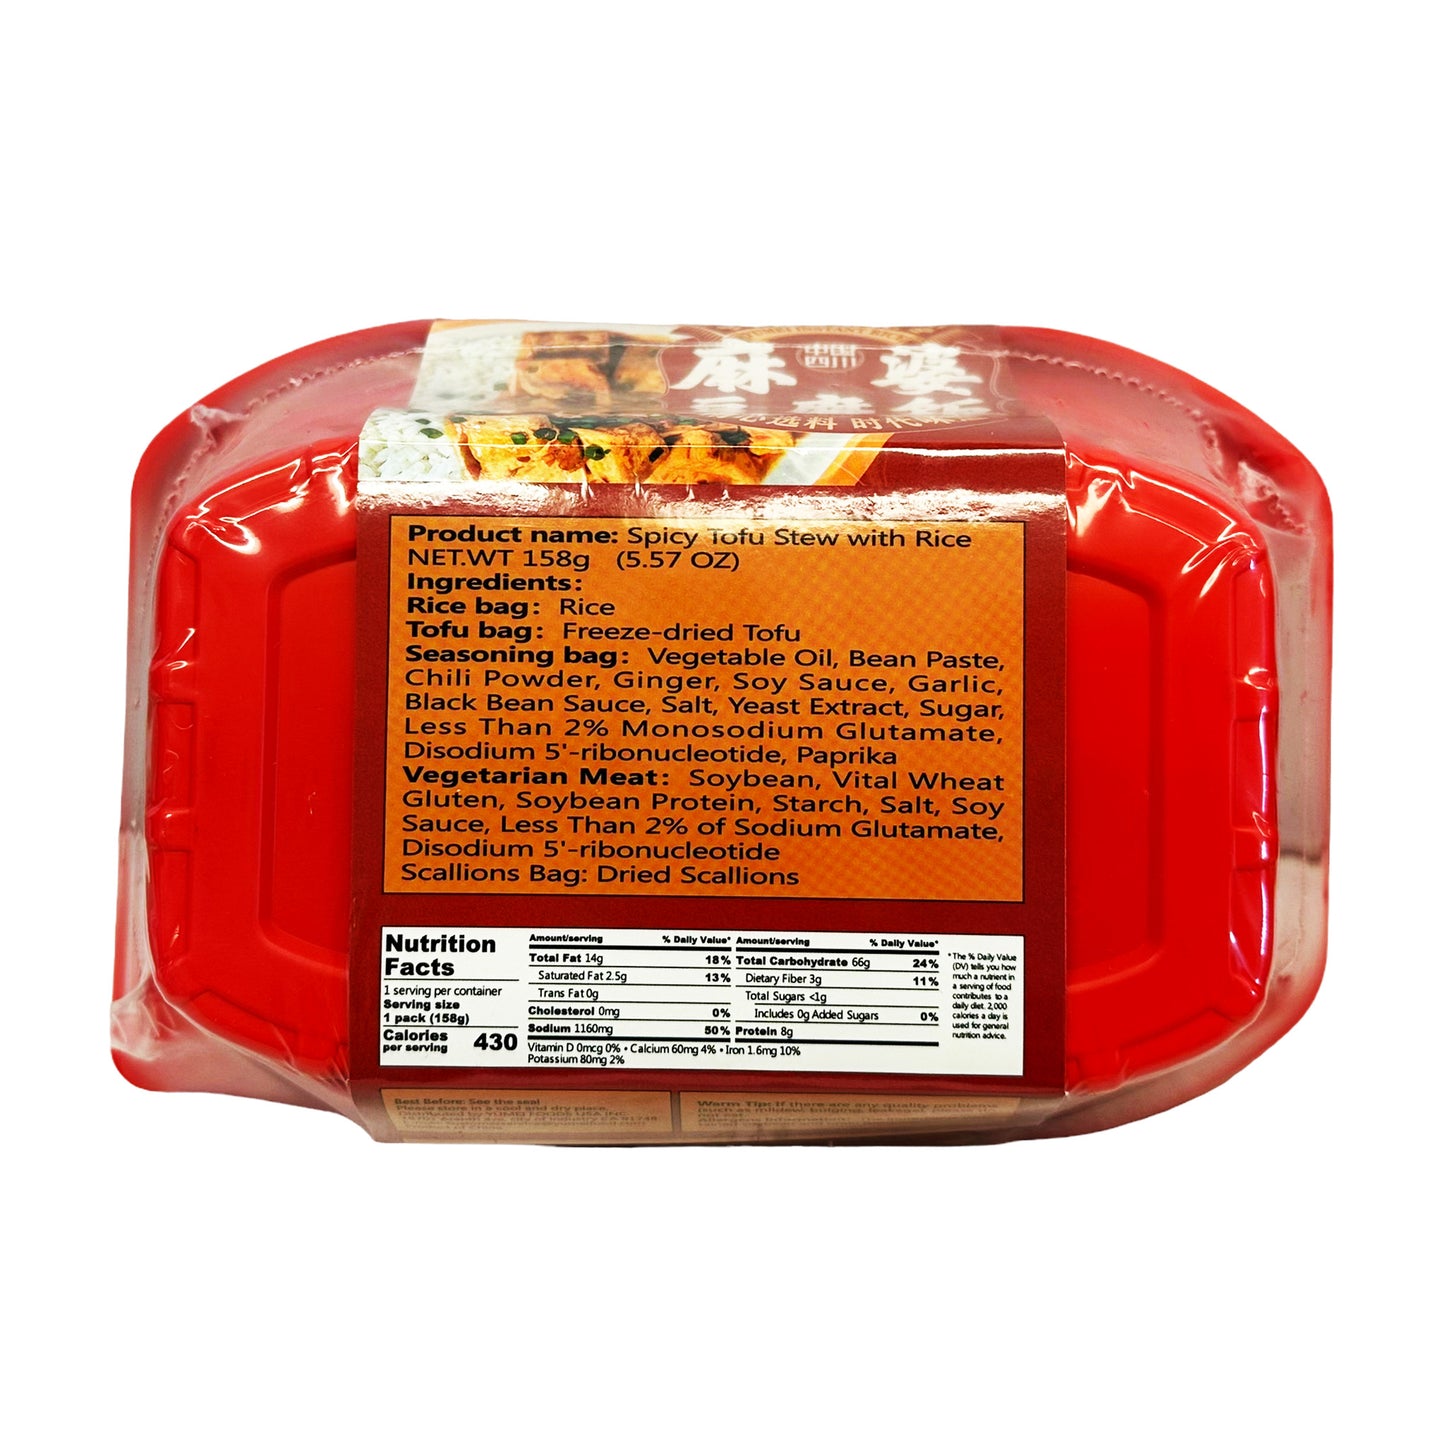 Back graphic image of Yumei Instant Rice - Spicy Tofu Stew With Rice 5.57oz (158g)